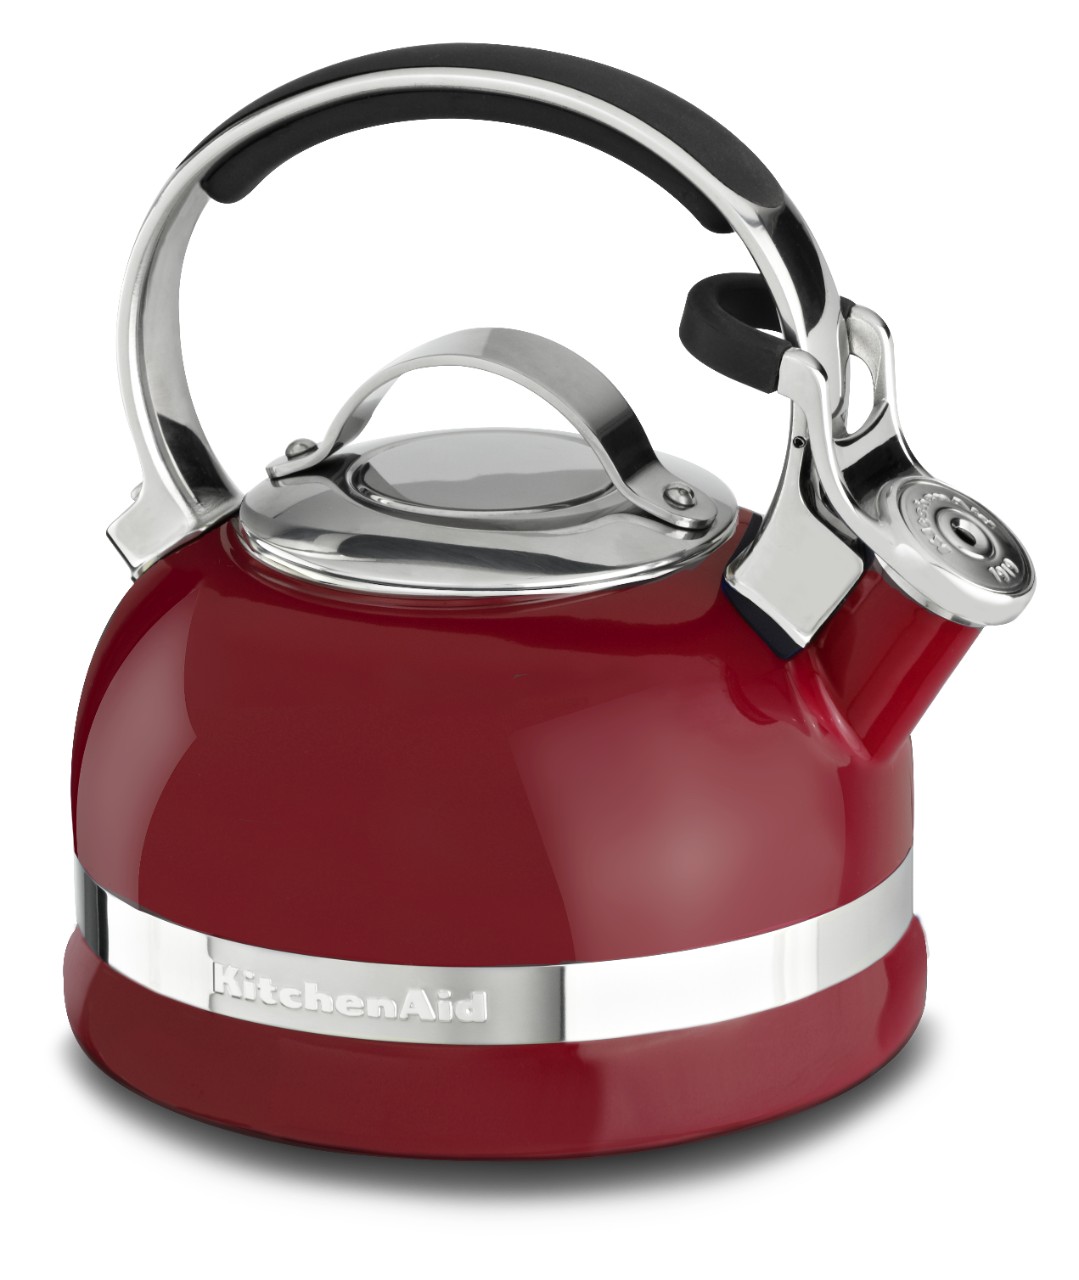 KitchenAid® tea kettles combine form and function for the perfect cup